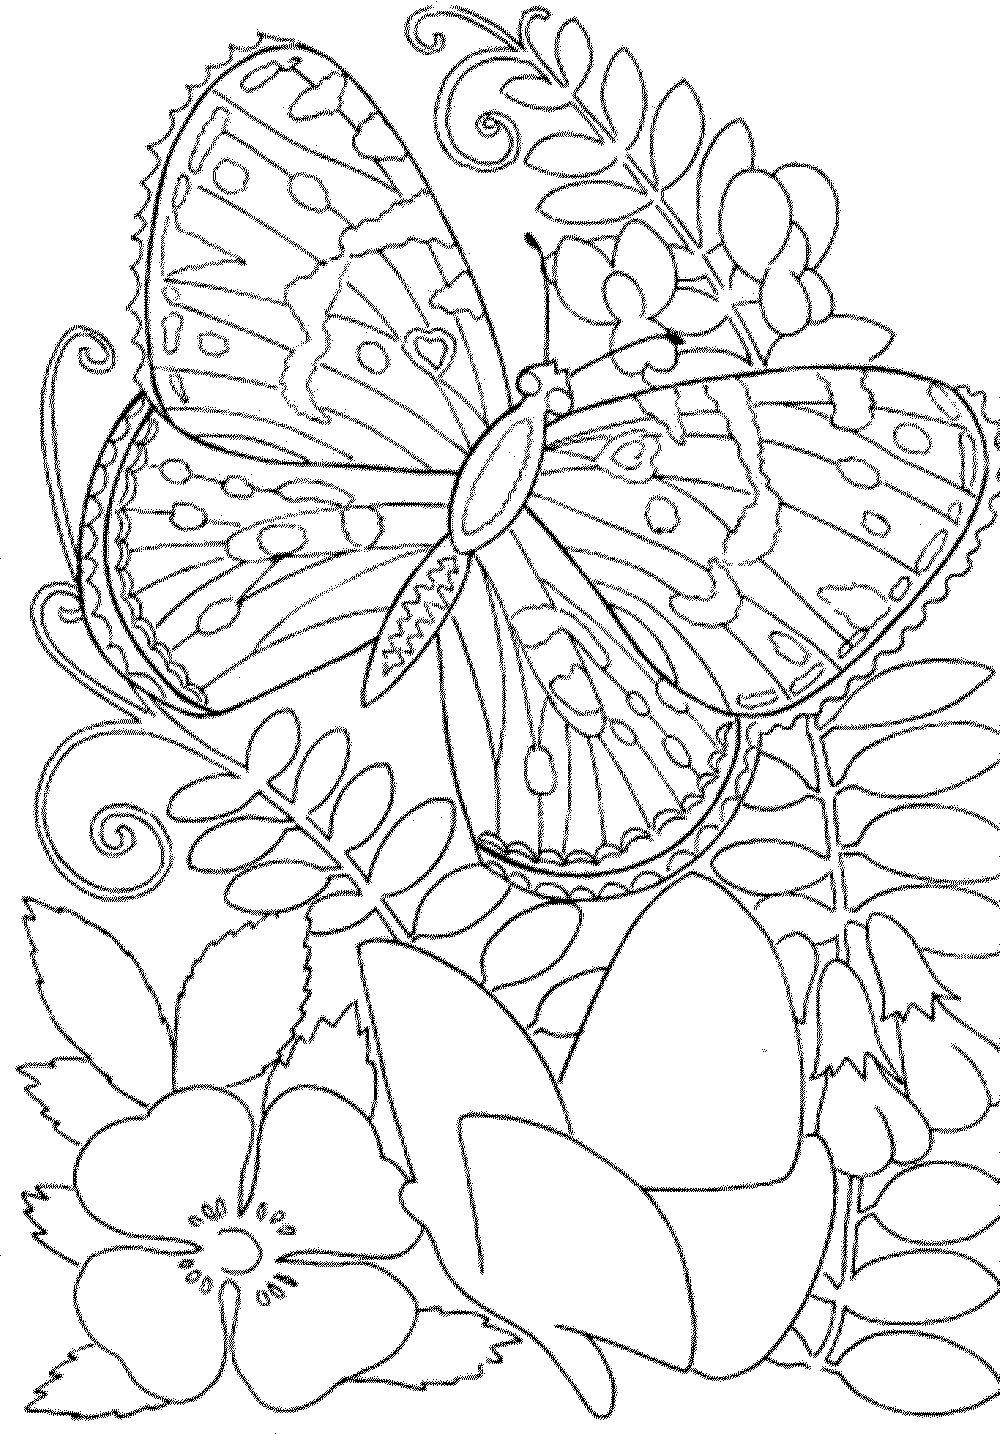 Free Owl Adult Coloring Pages To Print Coloring Home